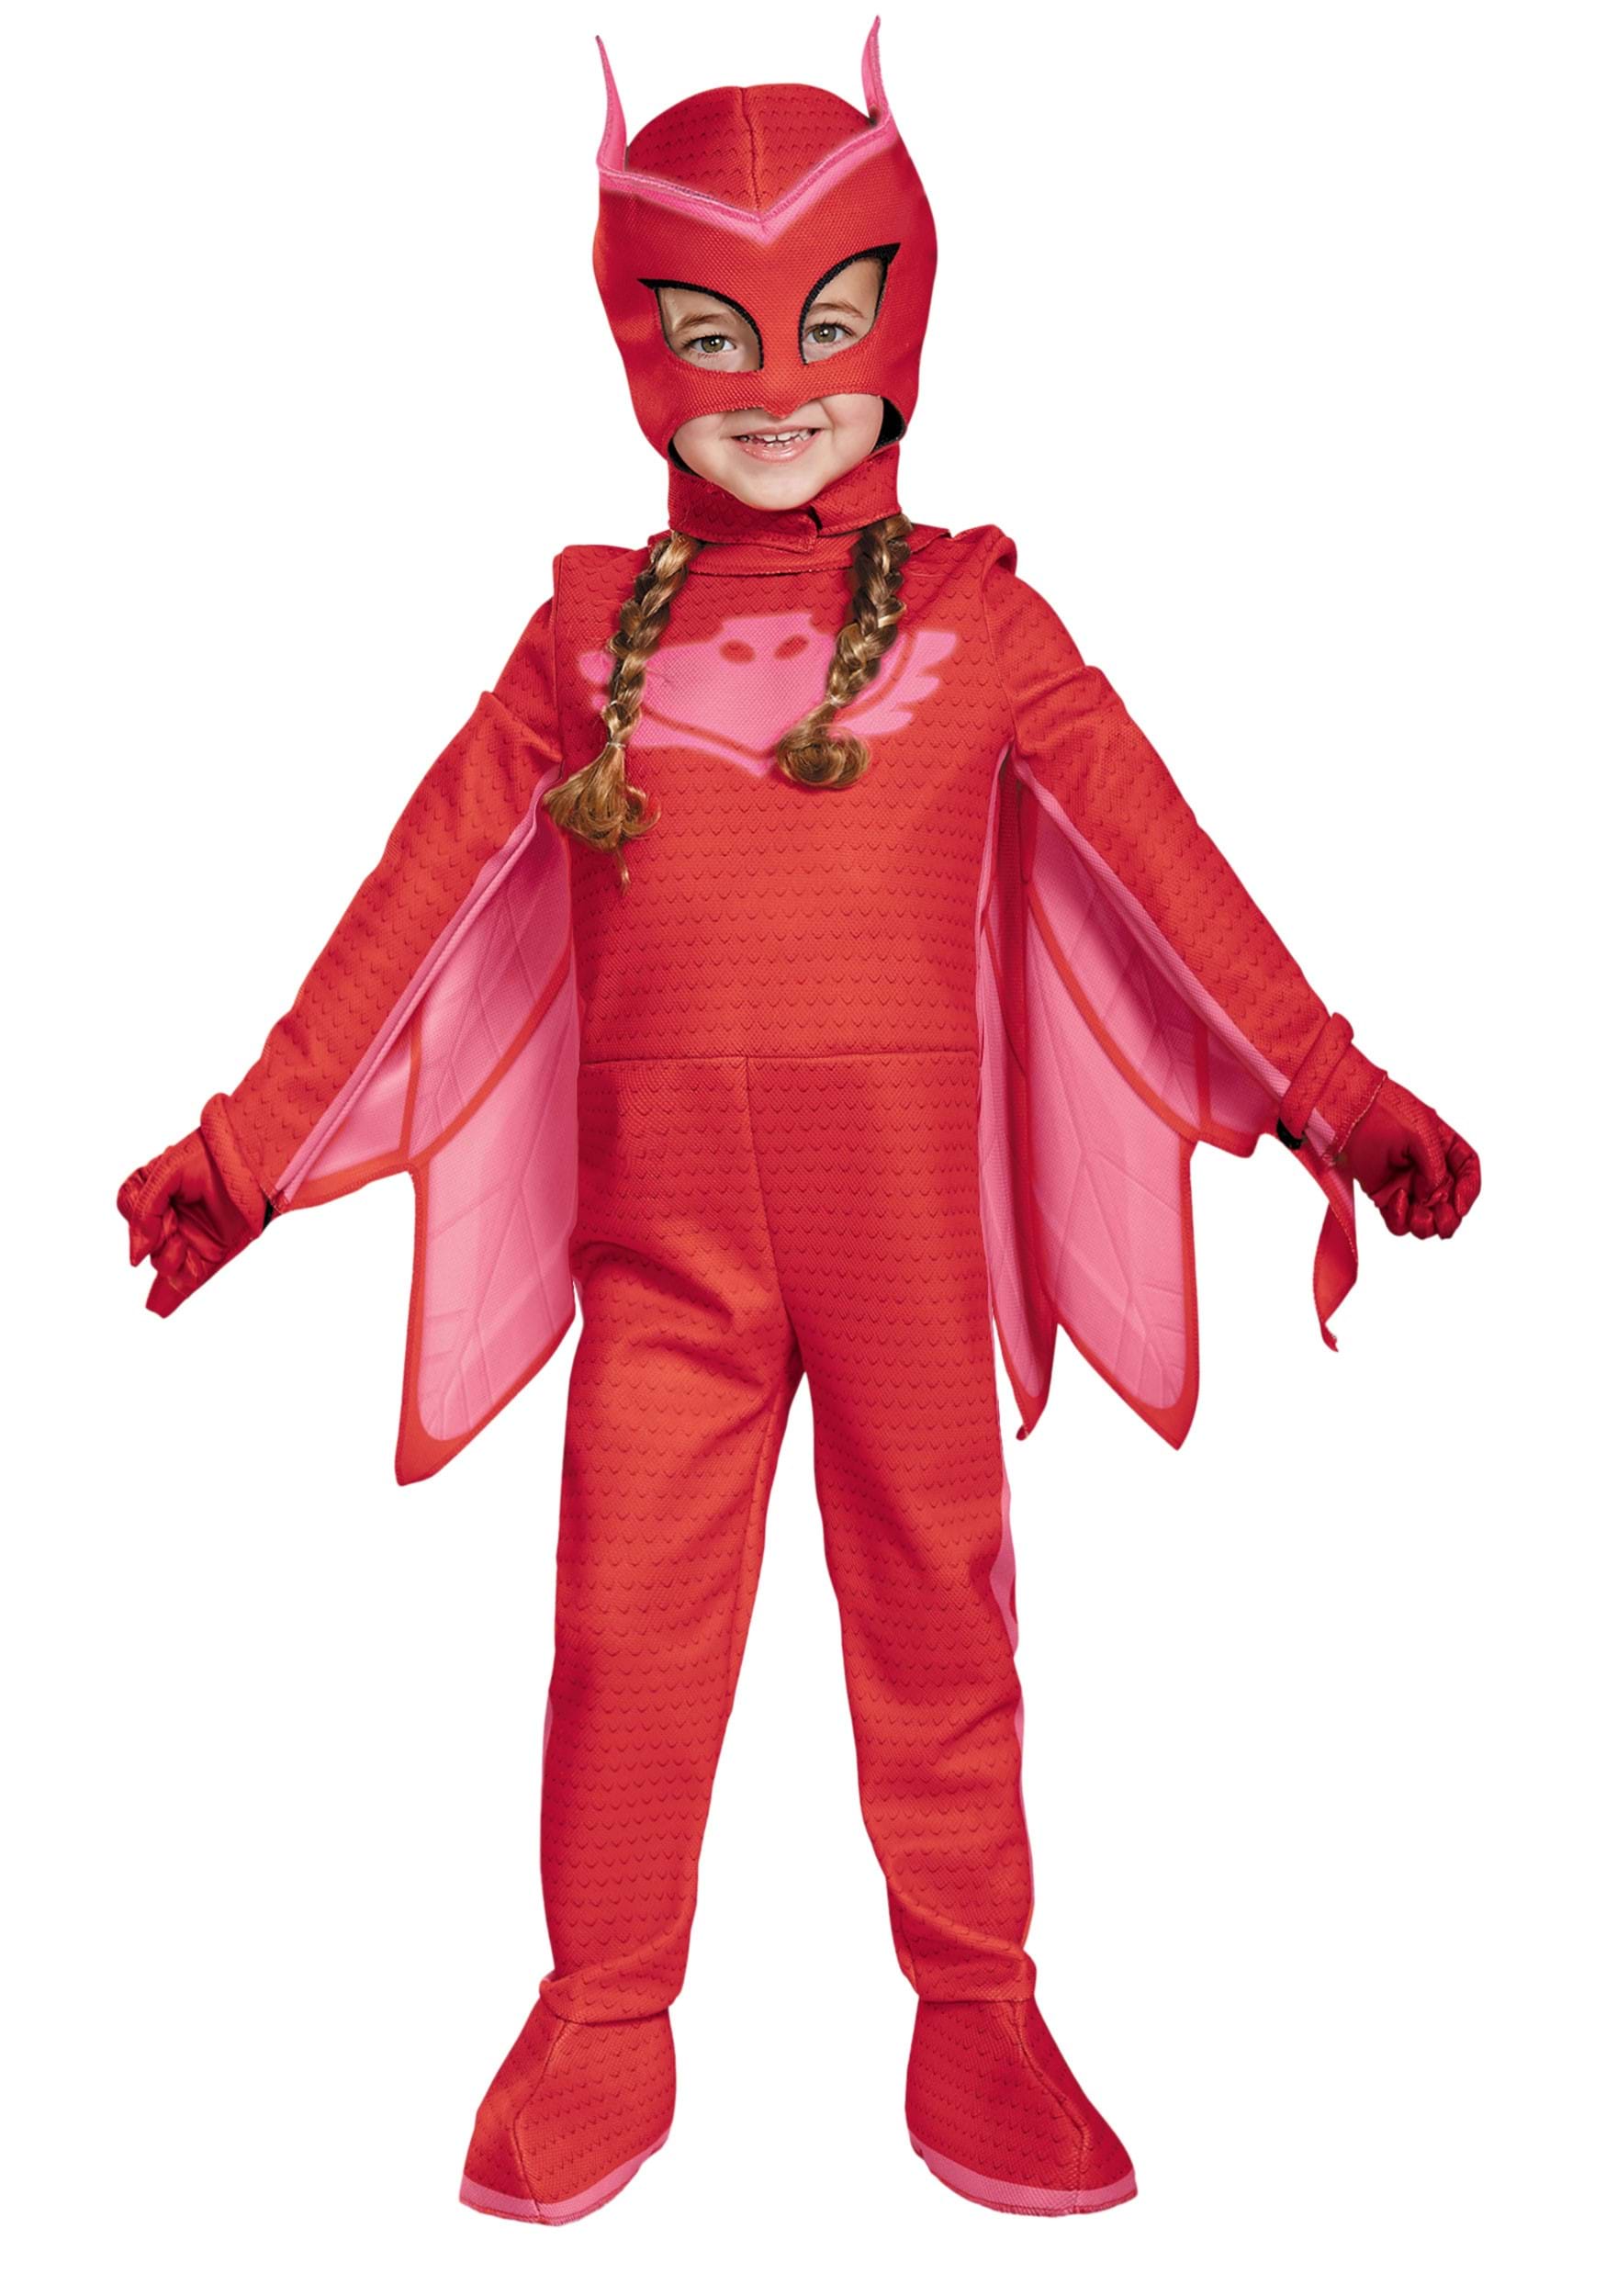 Photos - Fancy Dress PJ Masks Disguise Kids Deluxe Owlette Costume from  Red DI17171 